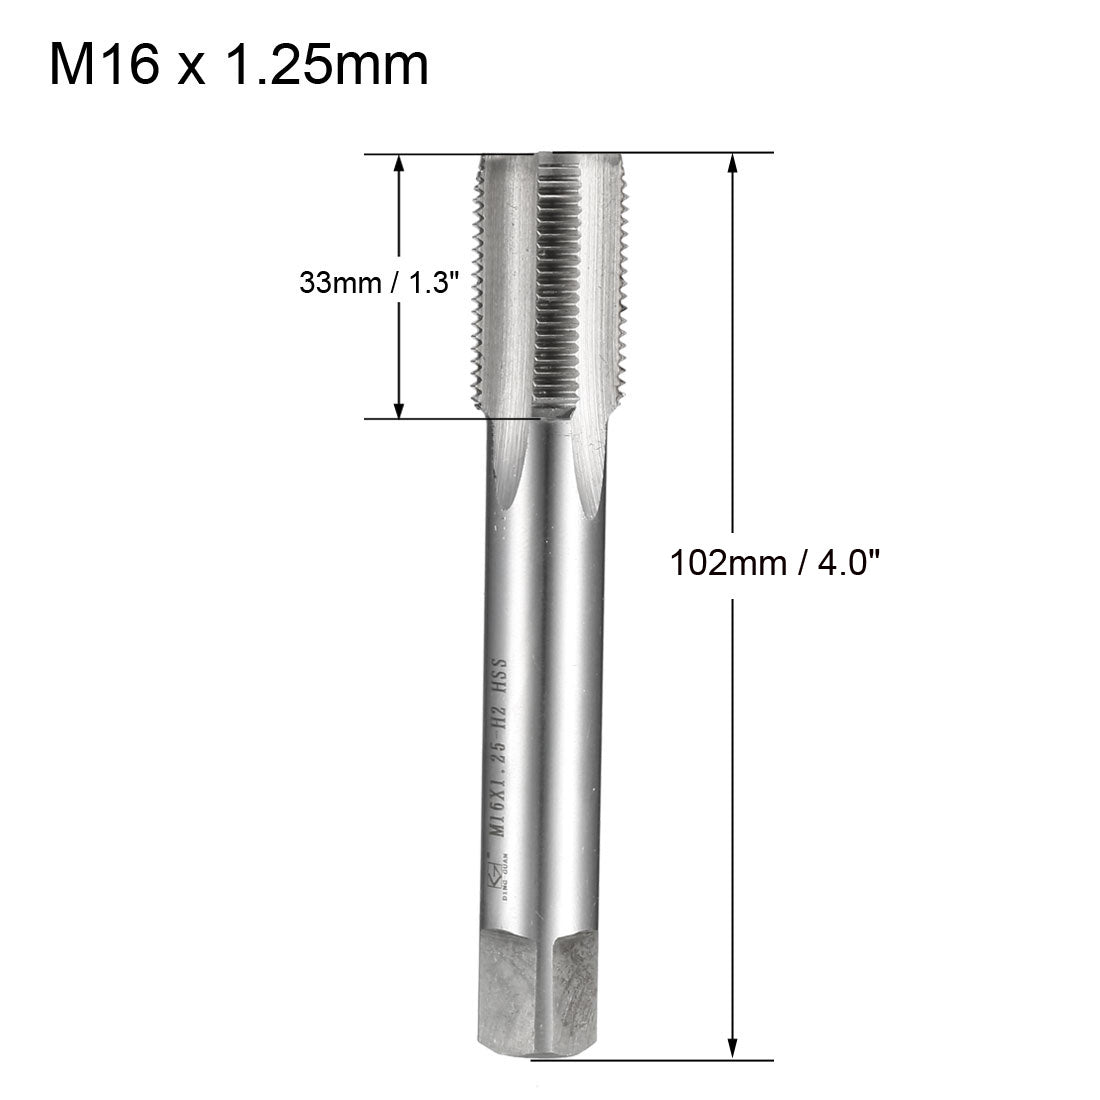 uxcell Uxcell Metric Machine Taps Straight Flutes Thread Tapping DIY Tool 2pcs